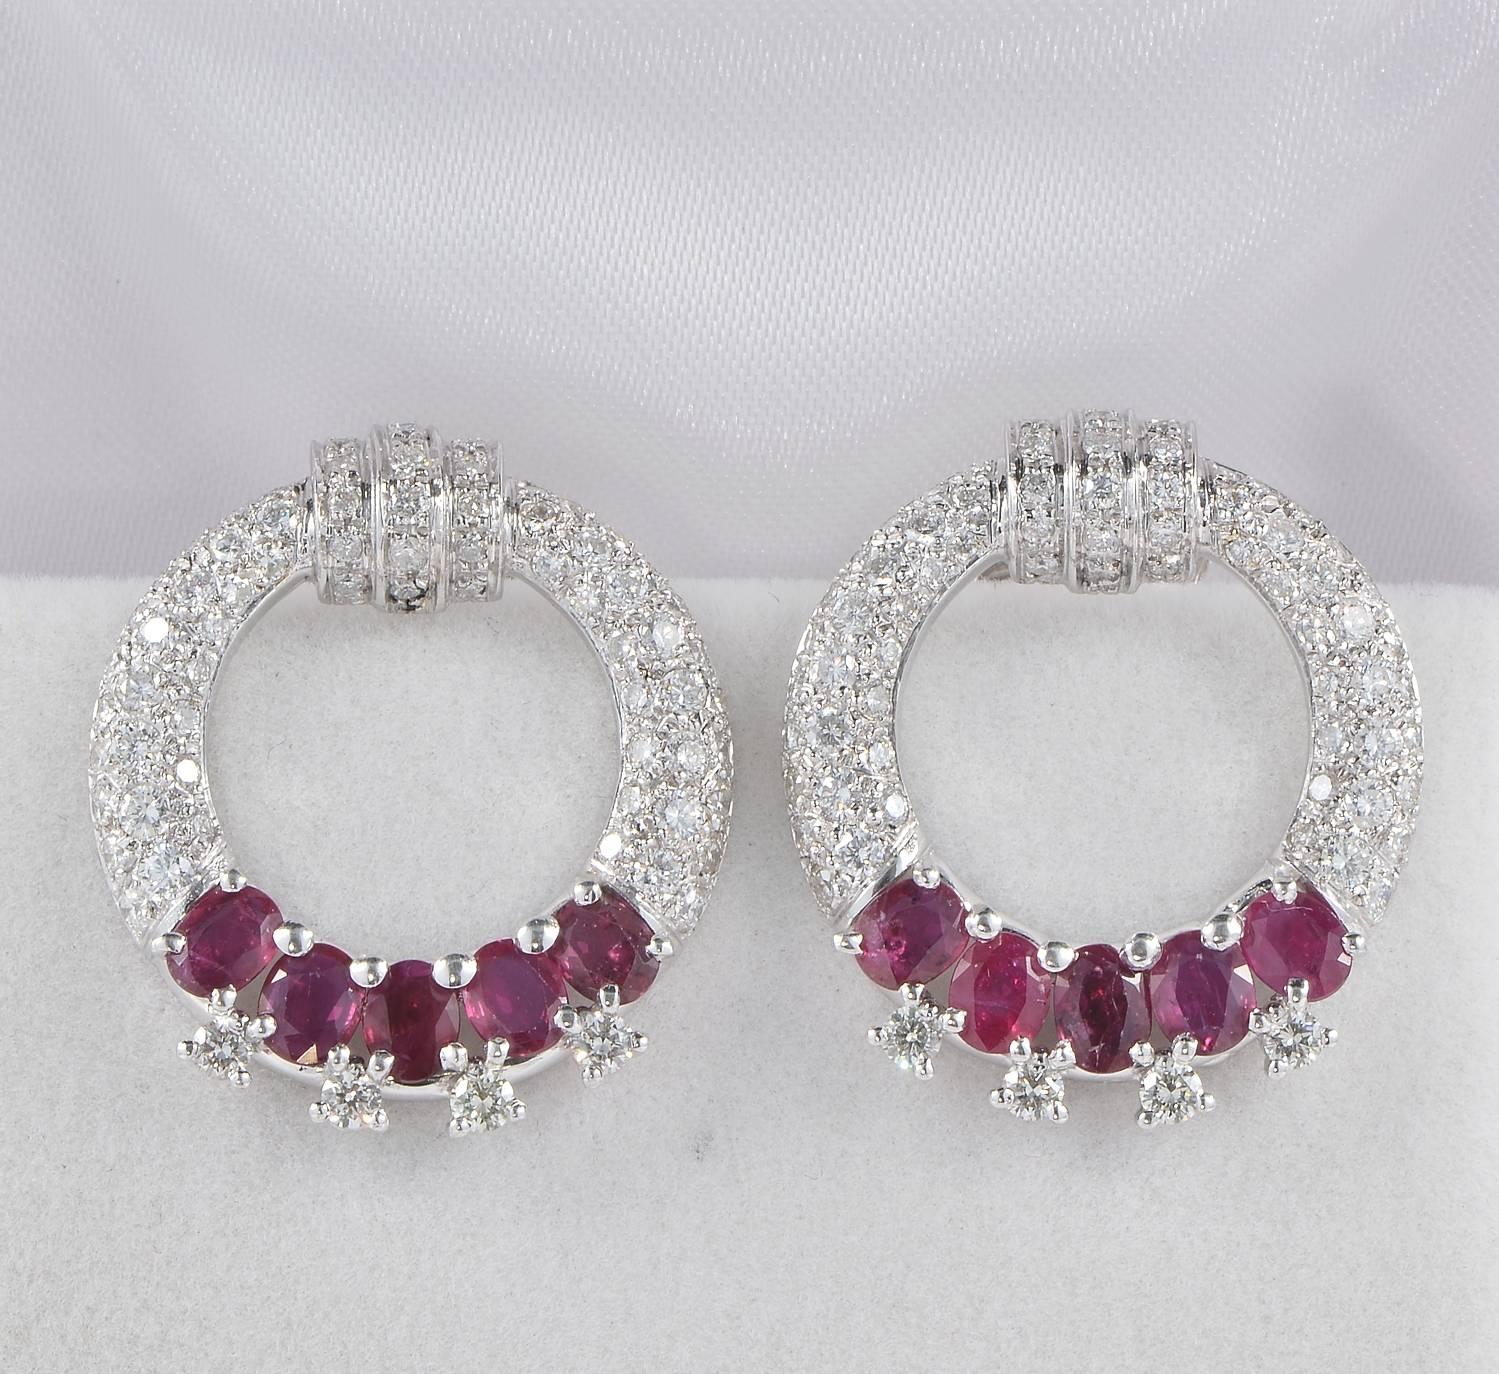 Reduced!
One off pair of vintage earrings set with natural Ruby & Diamond in contrast.
Sophisticate in design beautifully modelled as wide hoops, with amazing colour contrast between natural Rubies and Diamond sparkle.
Hand crafted of solid 18 KT